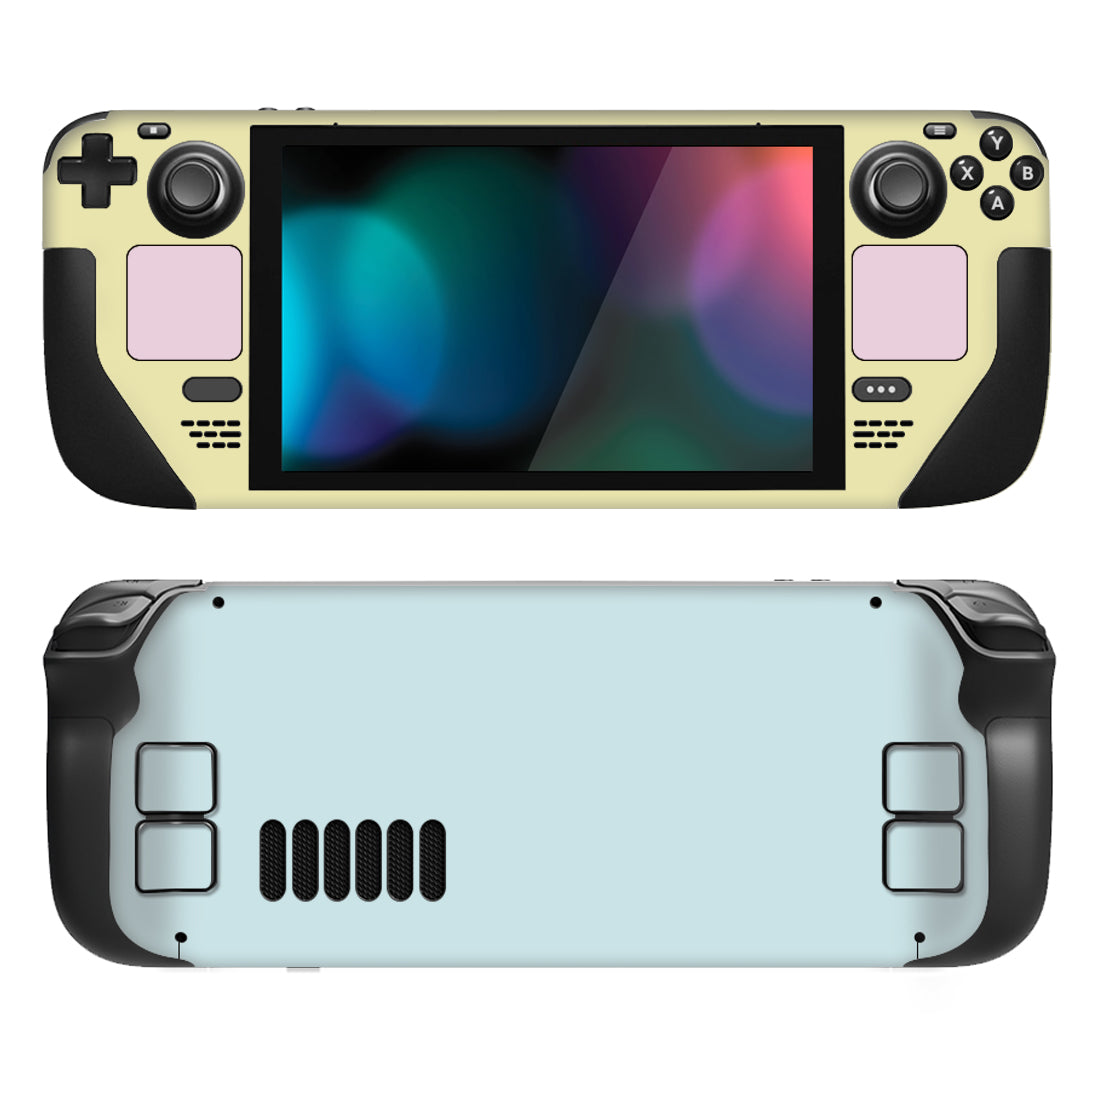 PlayVital Full Set Protective Skin Decal for Steam Deck, Custom Stickers Vinyl Cover for Steam Deck Handheld Gaming PC - Pale Series - Cream & Pink & Columbia Blue - SDTM088 PlayVital